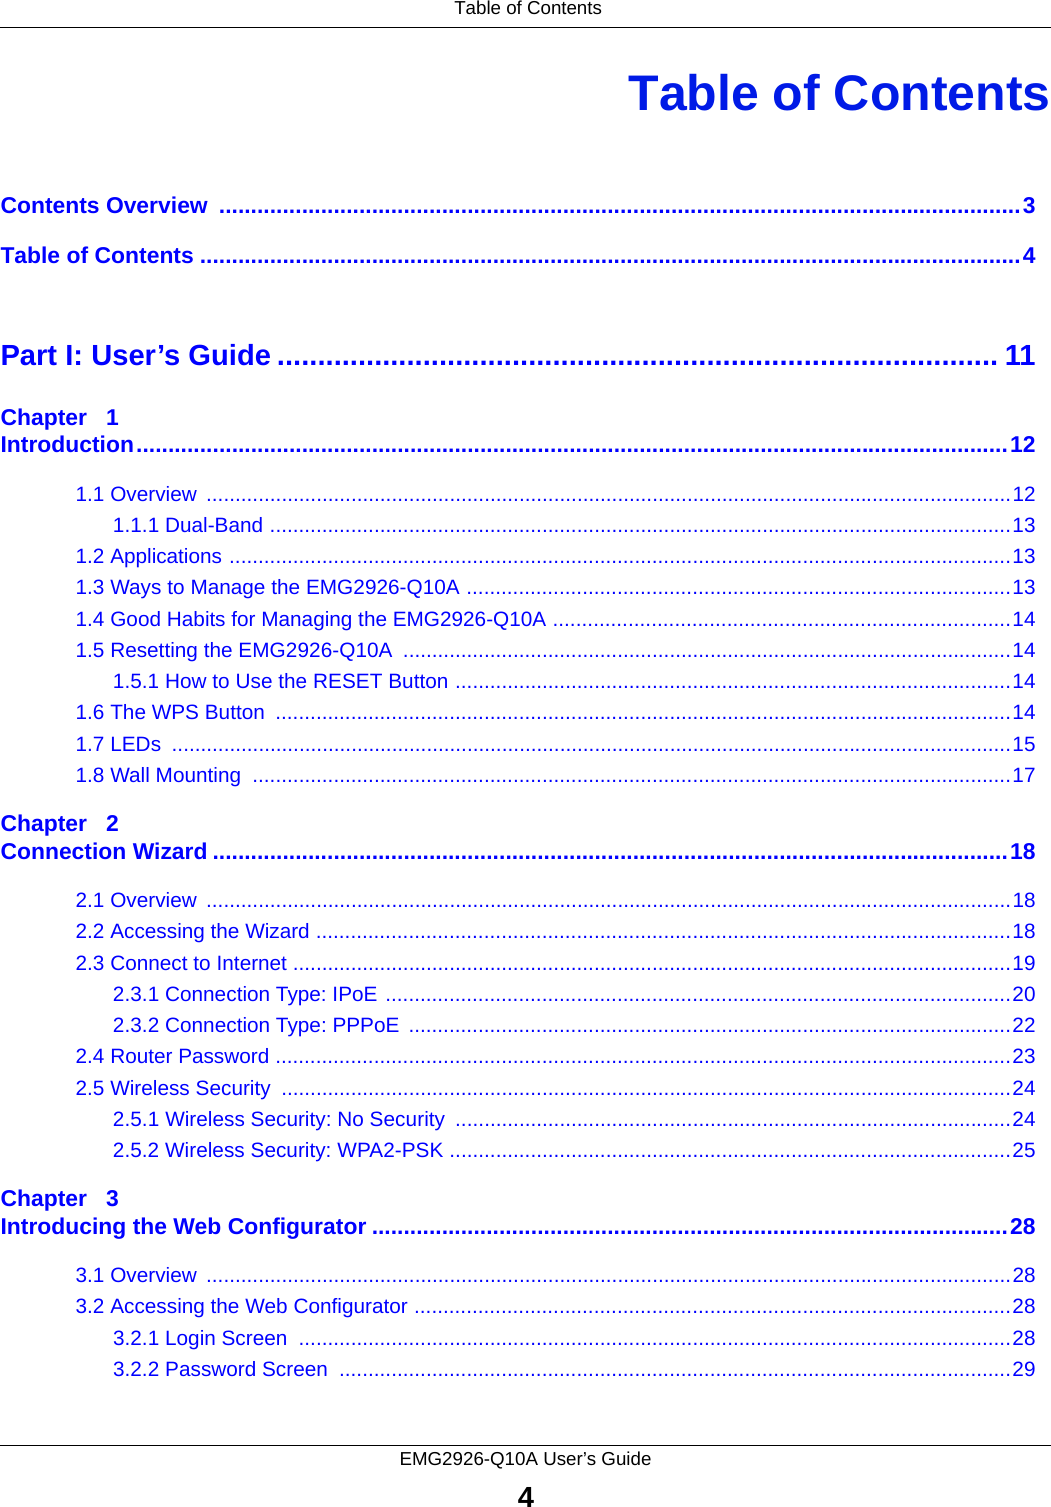 Table of ContentsEMG2926-Q10A User’s Guide4Table of ContentsContents Overview  ..............................................................................................................................3Table of Contents .................................................................................................................................4Part I: User’s Guide ......................................................................................... 11Chapter   1Introduction.........................................................................................................................................121.1 Overview  ...........................................................................................................................................121.1.1 Dual-Band ................................................................................................................................131.2 Applications .......................................................................................................................................131.3 Ways to Manage the EMG2926-Q10A ..............................................................................................131.4 Good Habits for Managing the EMG2926-Q10A ...............................................................................141.5 Resetting the EMG2926-Q10A .........................................................................................................141.5.1 How to Use the RESET Button ................................................................................................141.6 The WPS Button  ...............................................................................................................................141.7 LEDs  .................................................................................................................................................151.8 Wall Mounting  ...................................................................................................................................17Chapter   2Connection Wizard .............................................................................................................................182.1 Overview  ...........................................................................................................................................182.2 Accessing the Wizard ........................................................................................................................182.3 Connect to Internet ............................................................................................................................192.3.1 Connection Type: IPoE ............................................................................................................202.3.2 Connection Type: PPPoE  ........................................................................................................222.4 Router Password ...............................................................................................................................232.5 Wireless Security  ..............................................................................................................................242.5.1 Wireless Security: No Security ................................................................................................242.5.2 Wireless Security: WPA2-PSK .................................................................................................25Chapter   3Introducing the Web Configurator ....................................................................................................283.1 Overview  ...........................................................................................................................................283.2 Accessing the Web Configurator .......................................................................................................283.2.1 Login Screen  ...........................................................................................................................283.2.2 Password Screen  ....................................................................................................................29